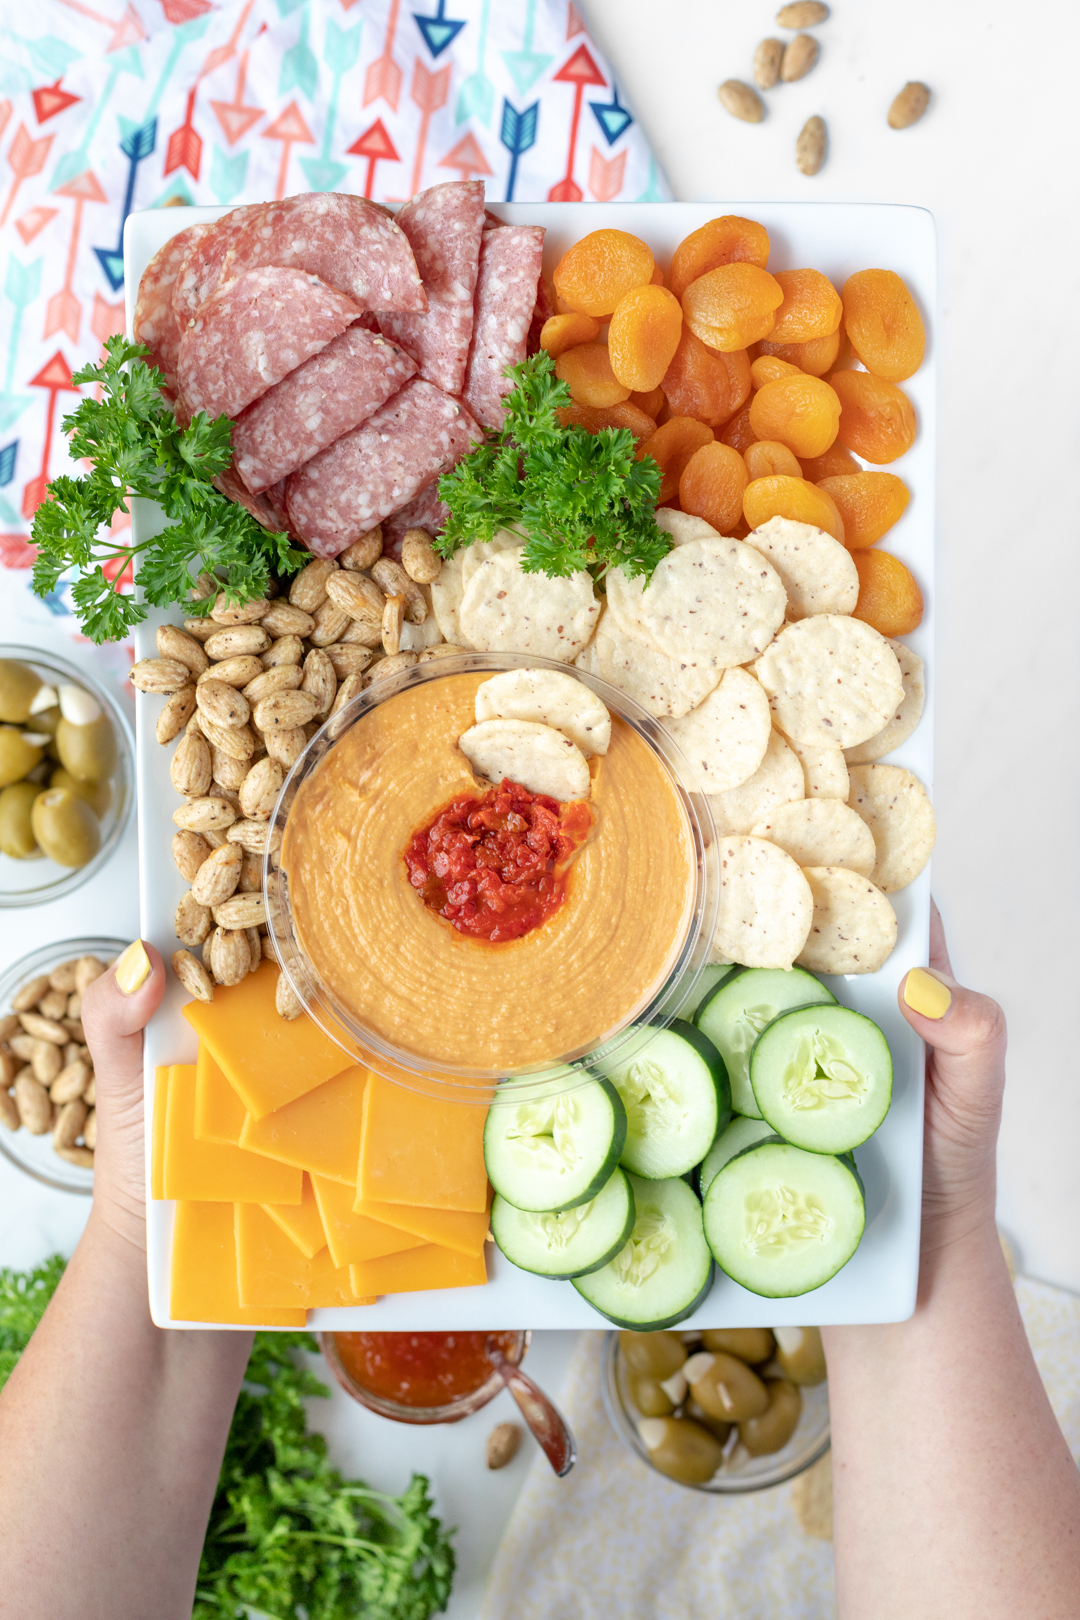 The Simple Summer Snack Tray You Need